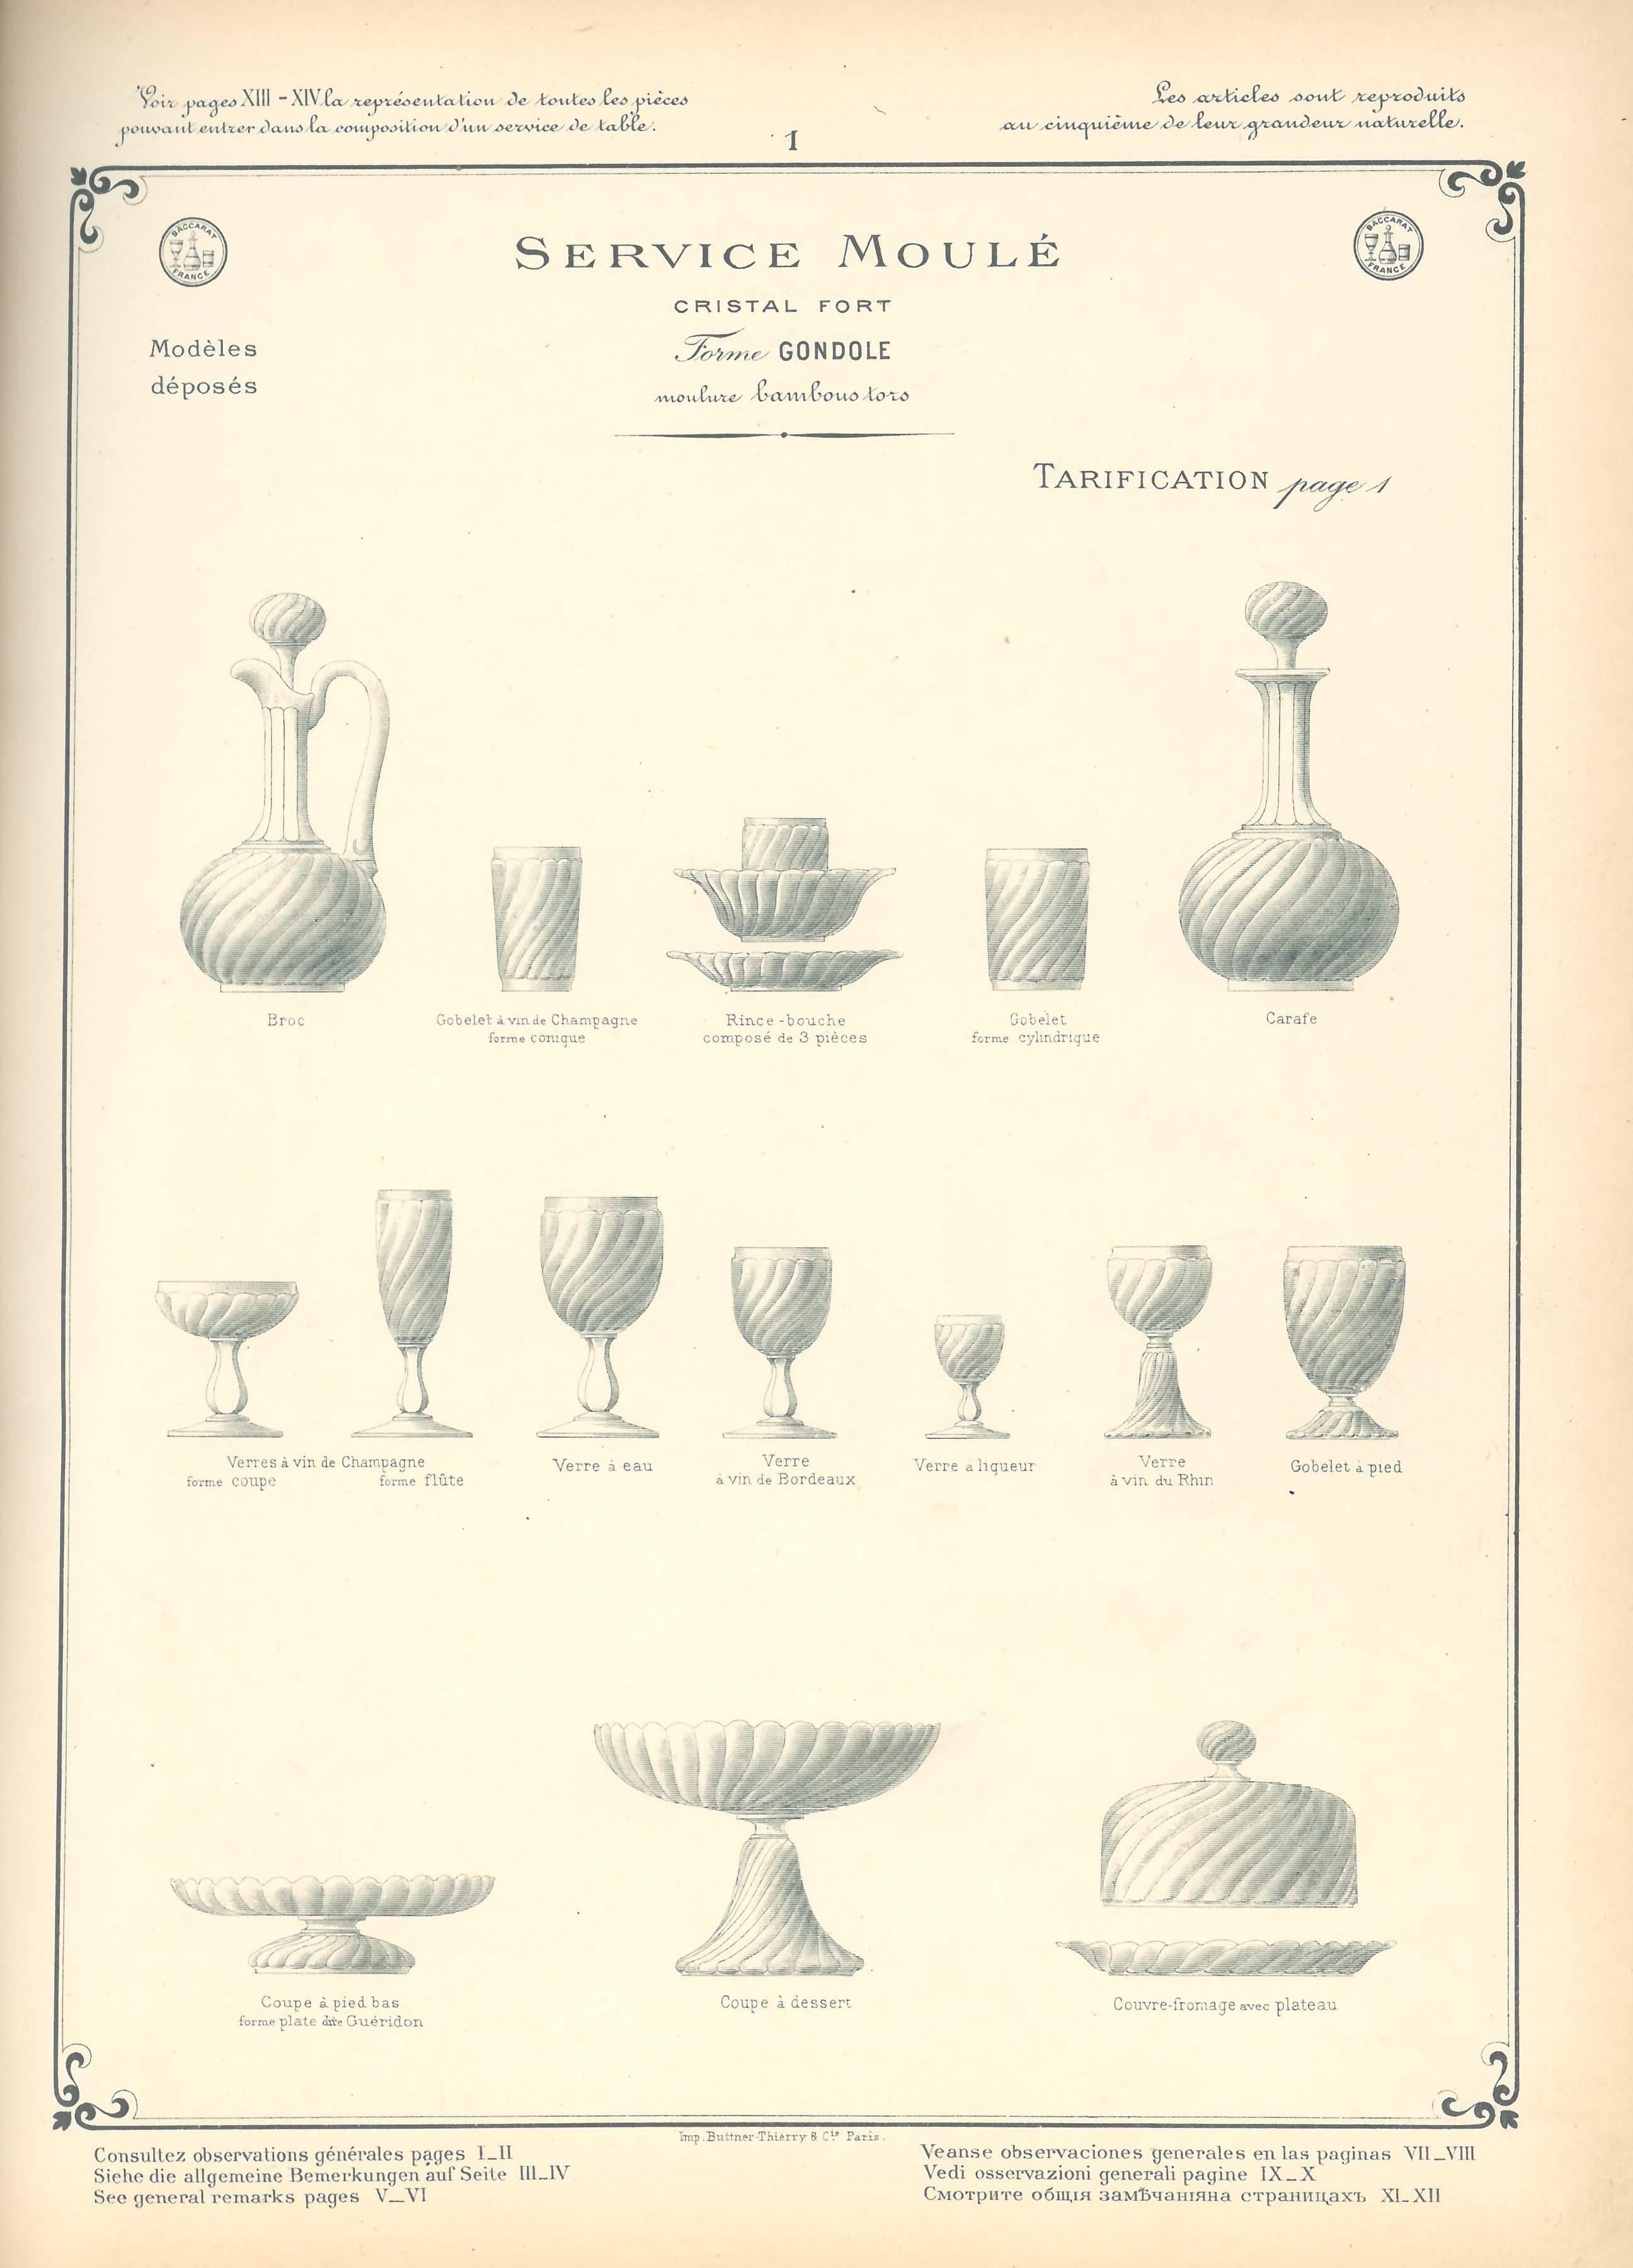 This is the 1903-1904 edition of the Baccarat company catalogue. It shows a wide range of styles and designs of this famous and iconic producer of crystal ware. There is a 16 page introduction with text in French, followed by 154 plates with